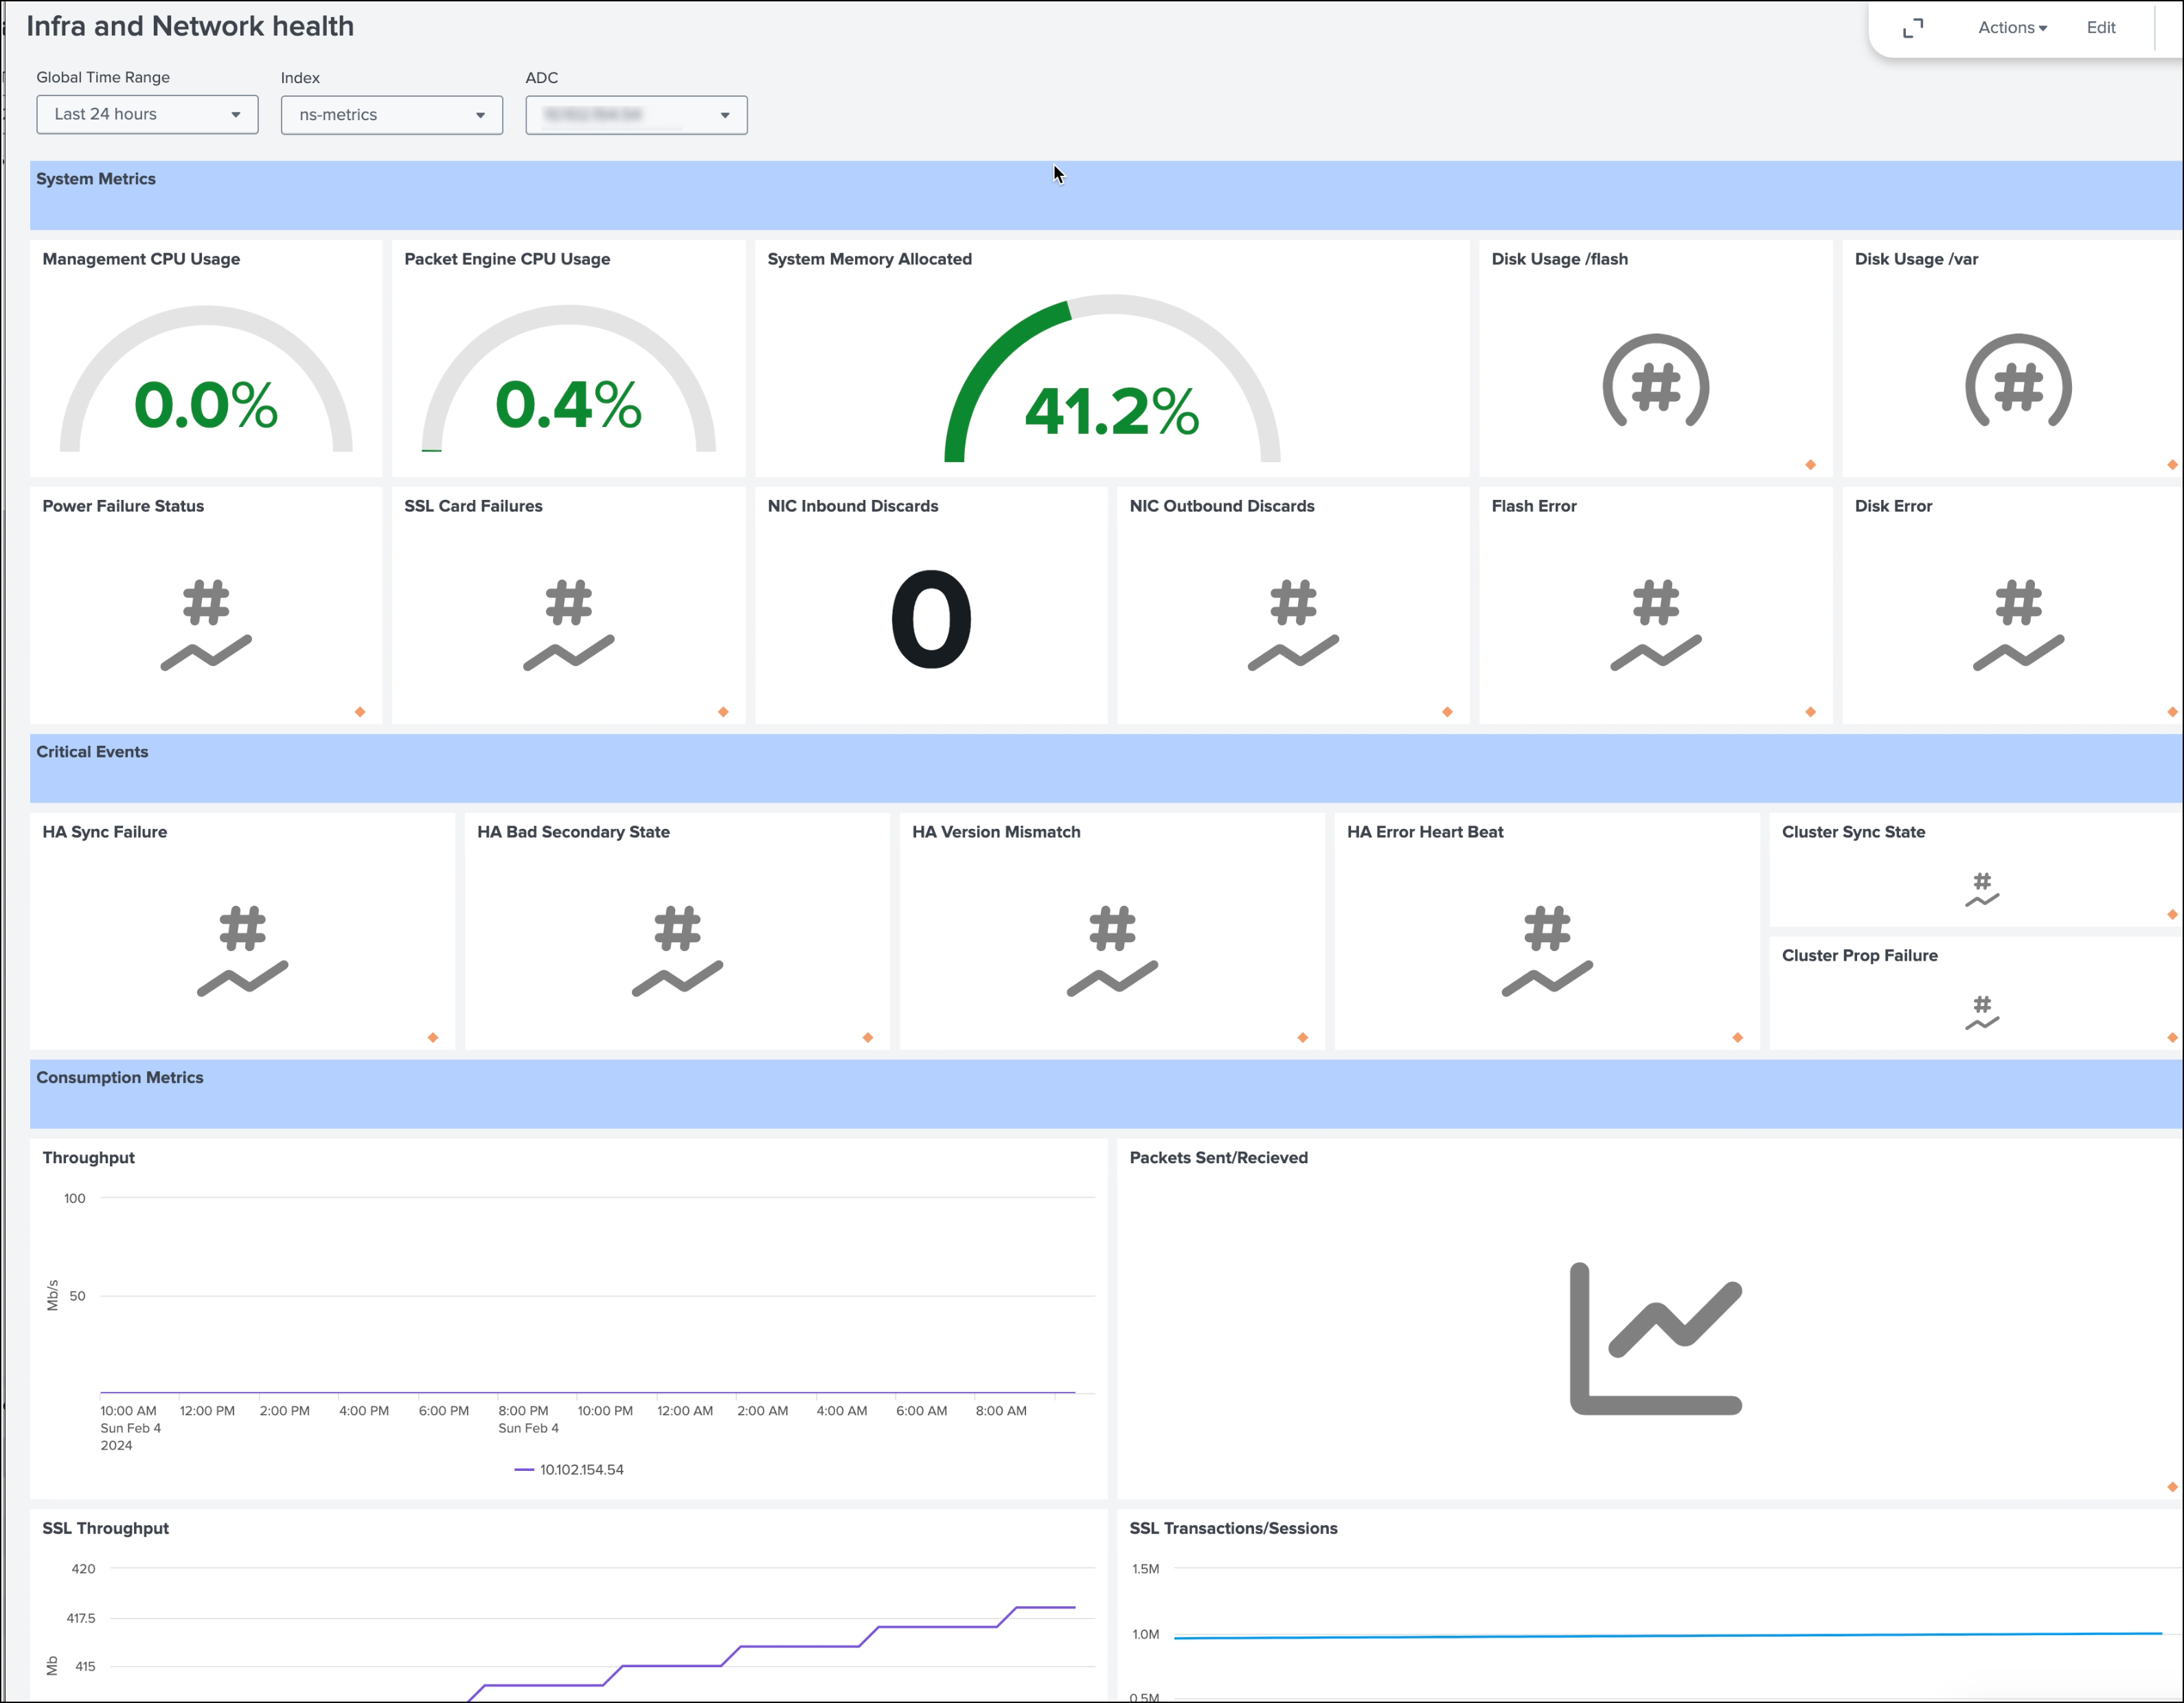 Infra and Network Health Dashboard for NetScaler 